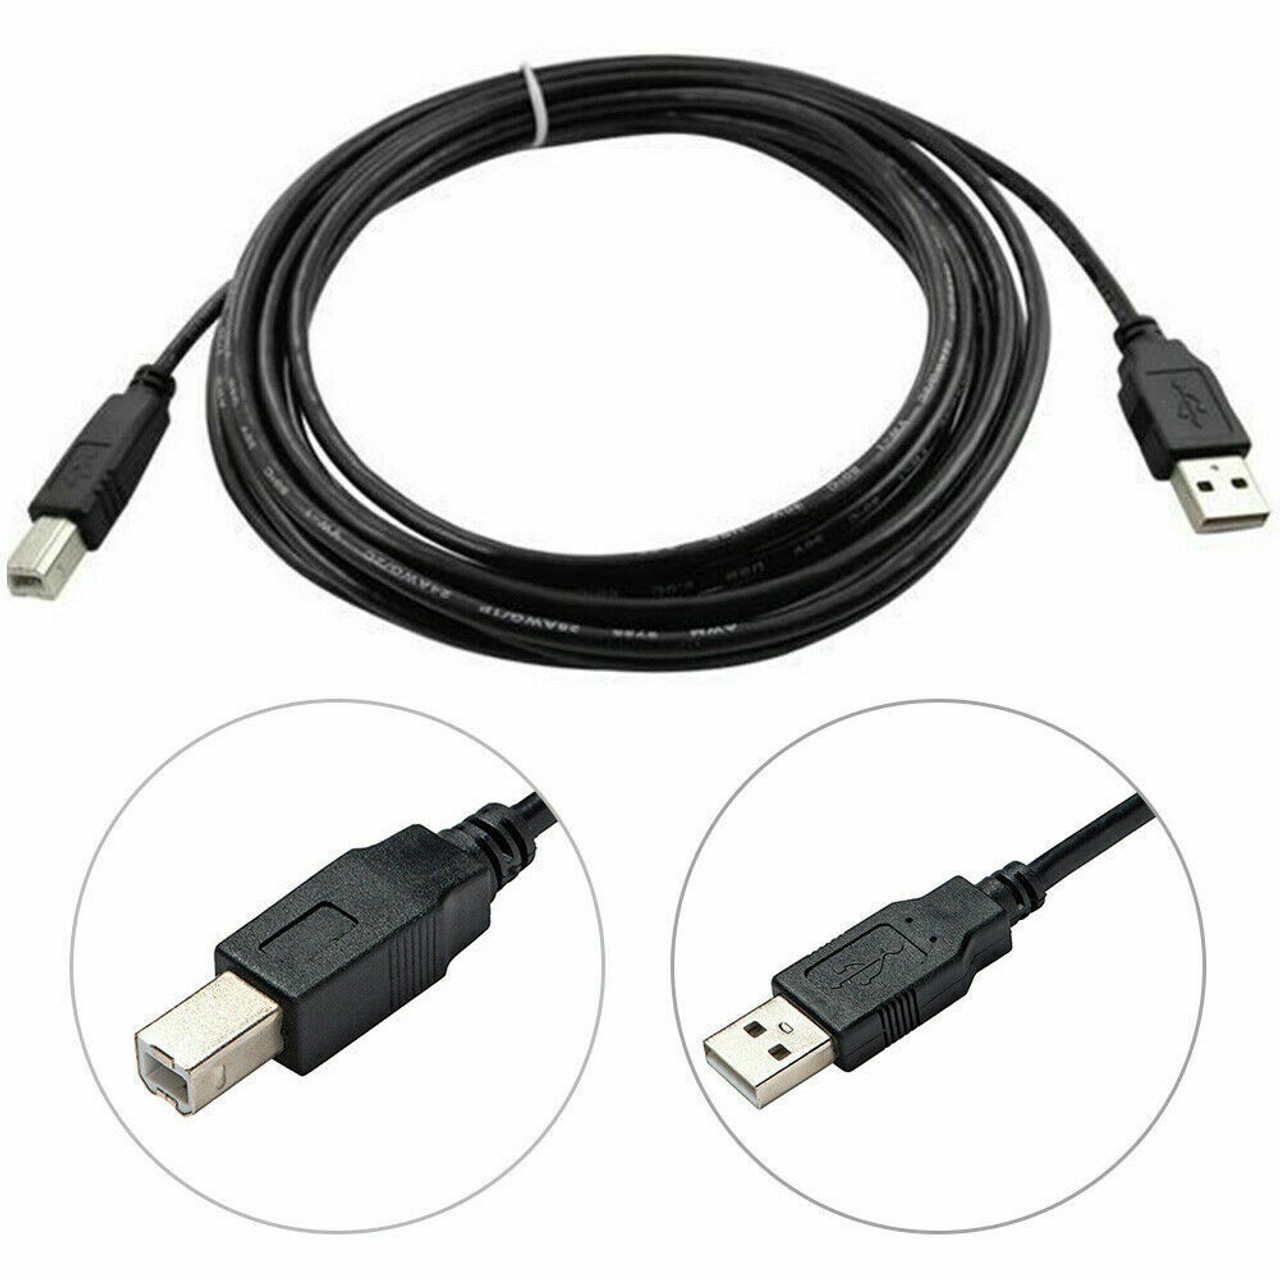 Printer Cable USB 2.0 A to B A Male to B Male for HP Cannon Epson Dell Brother